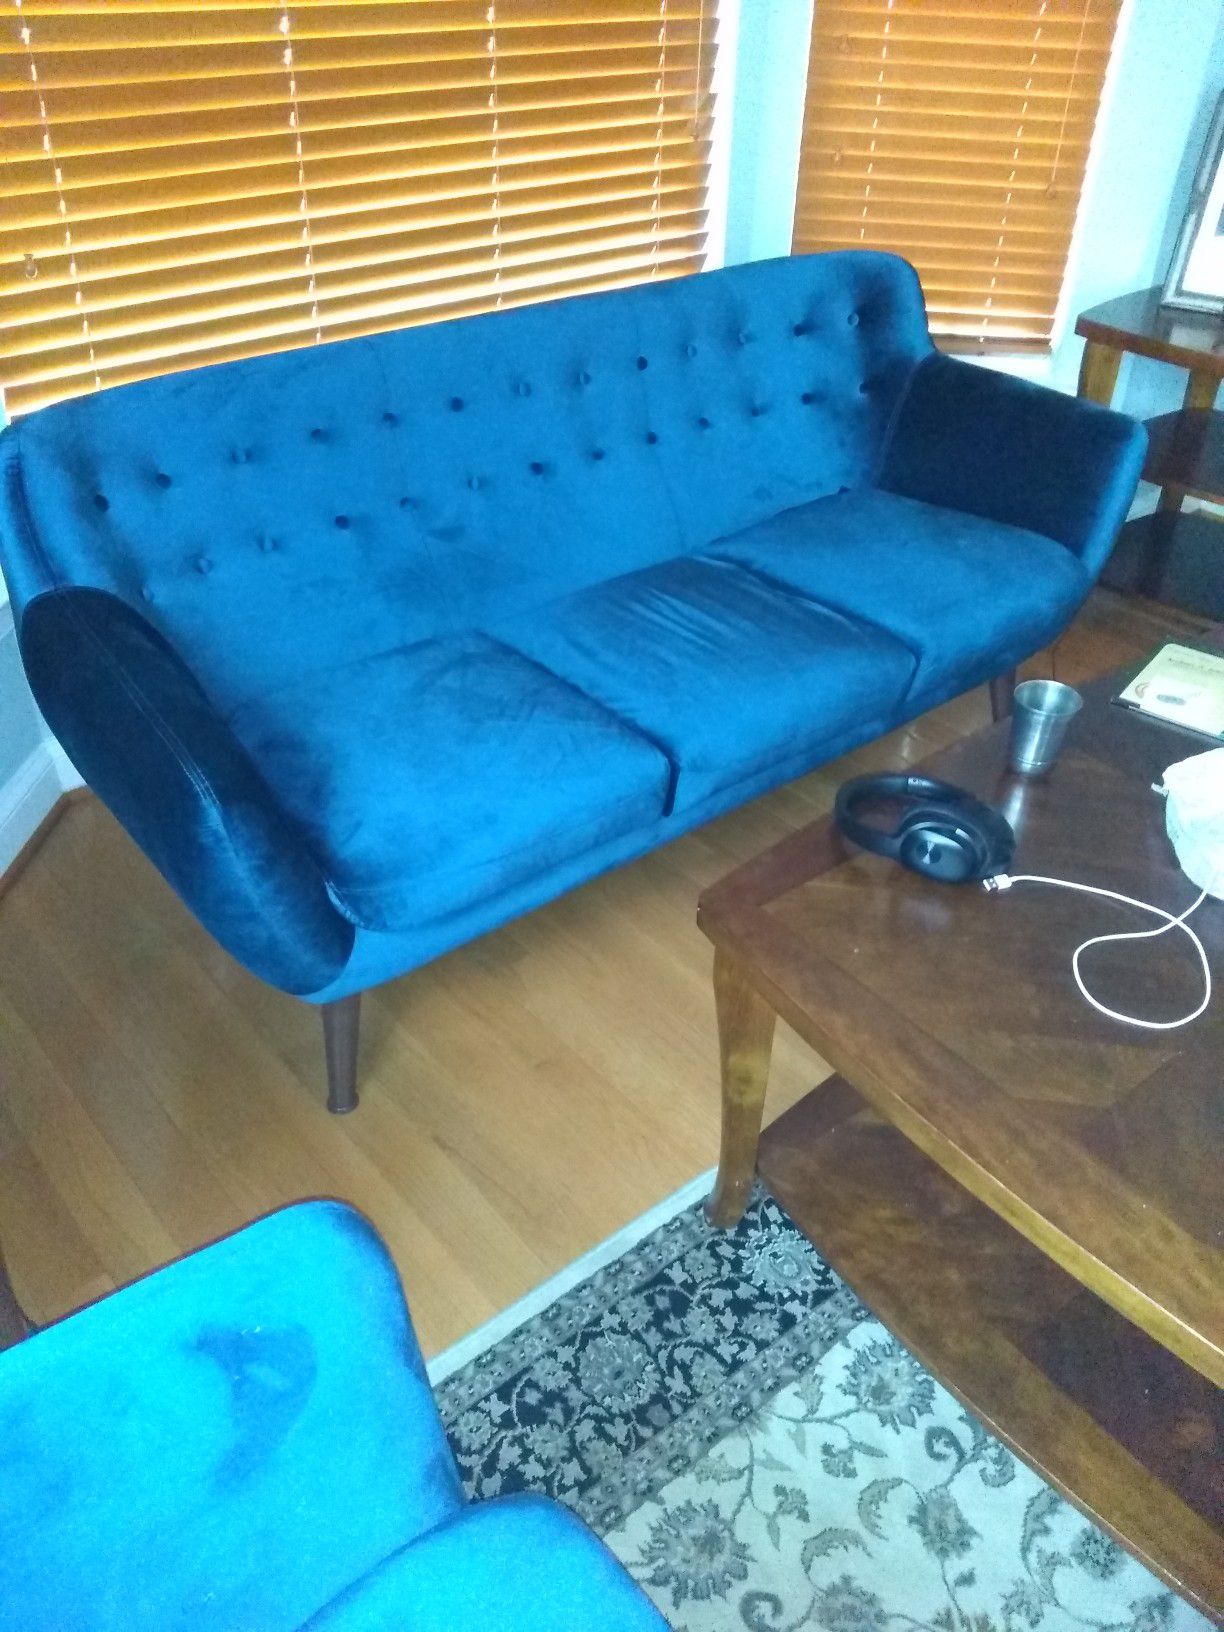 Couch and two chairs